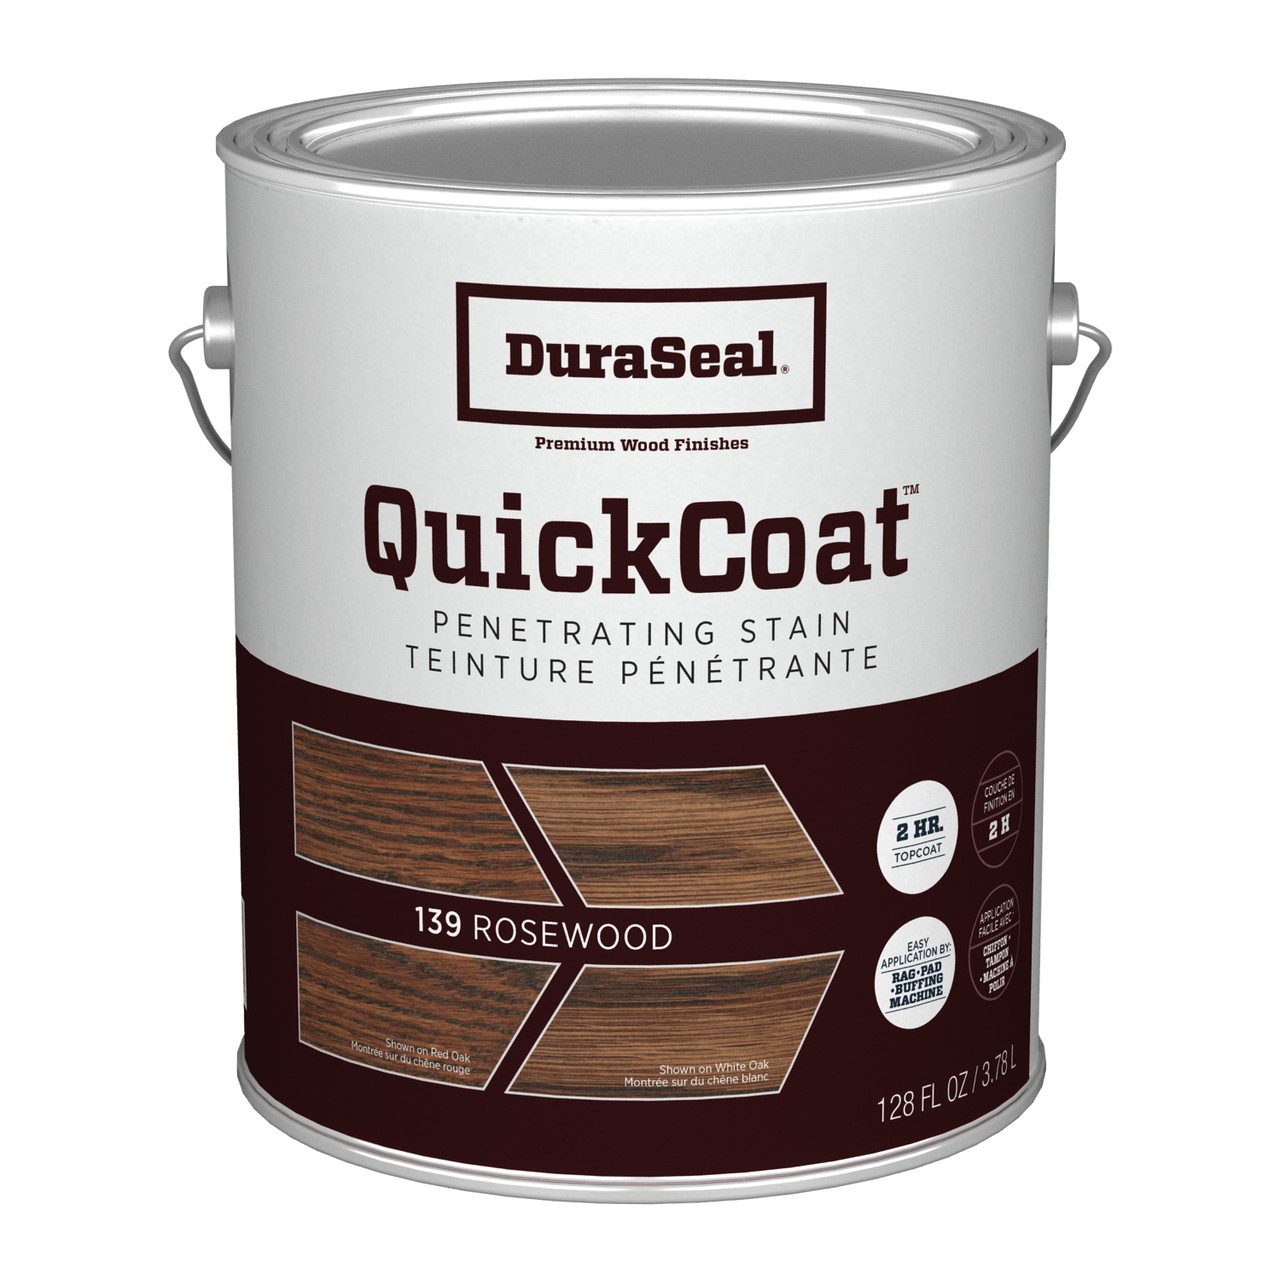 DuraSeal Quick Coat Stain - Rosewood Gallon